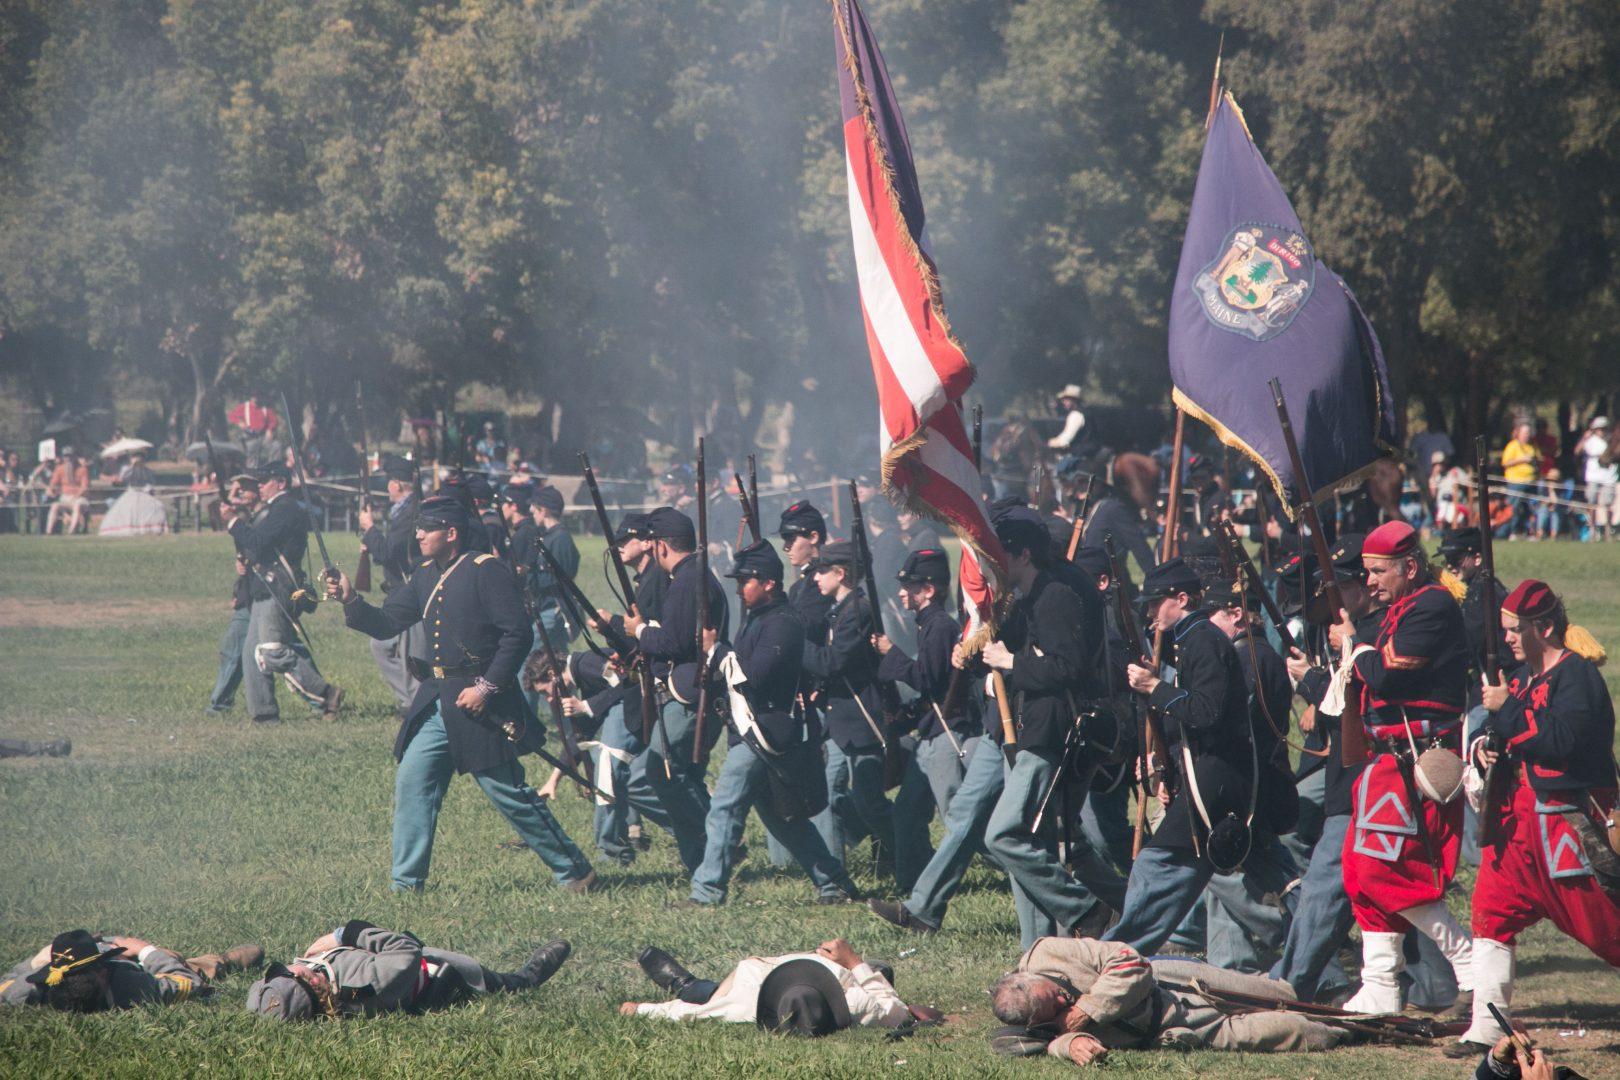 Re-enactors+stage+a+battle+at+Kearney+Park+this+weekend+for+the+25th+annual+Civil+War+Revisited%2C+the+largest+Civil+War+re-enactment+in+California.+